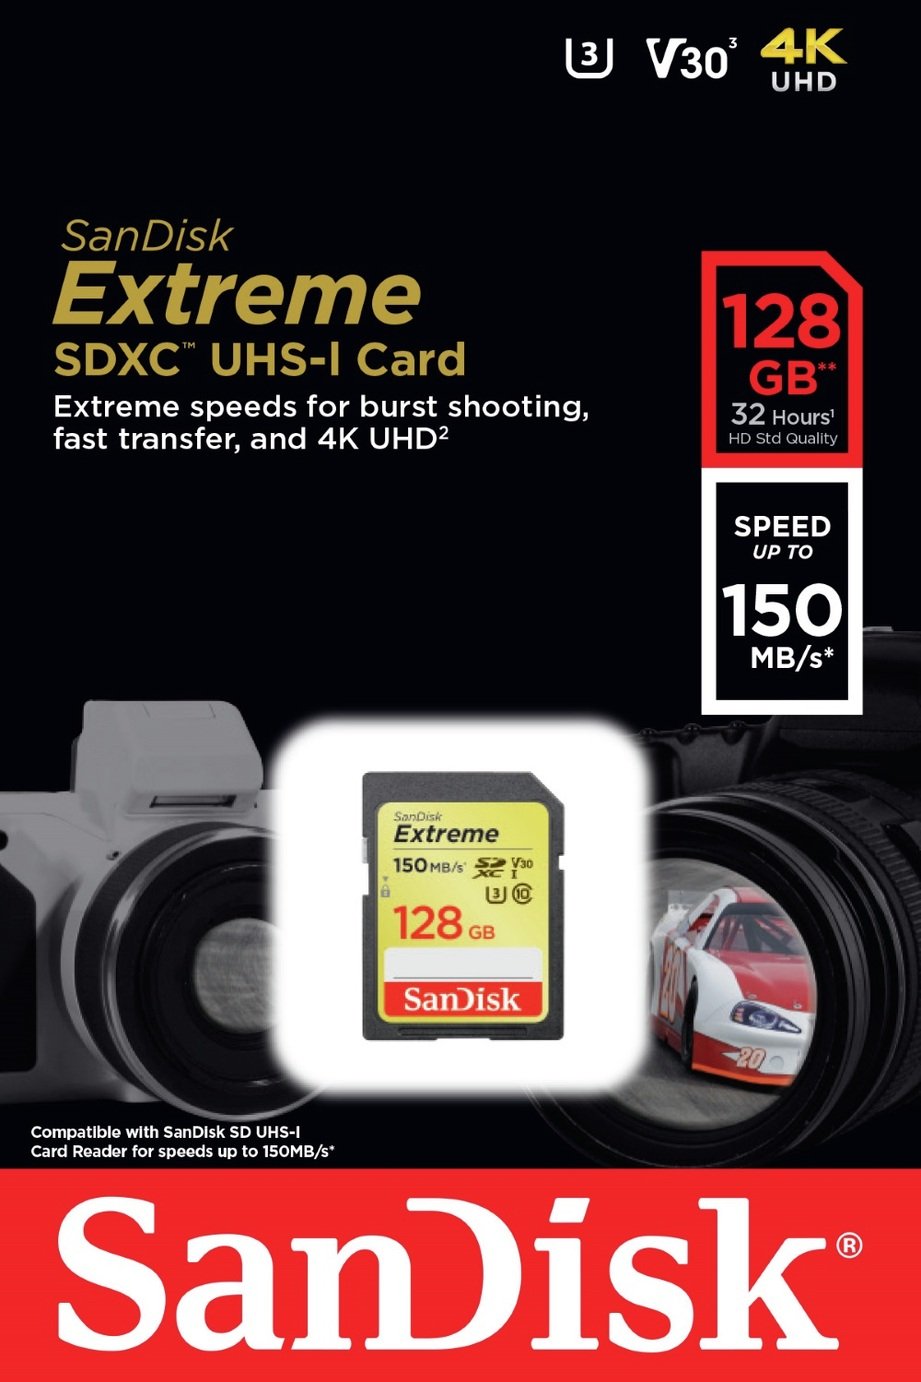 SanDisk Extreme 70MBs SDXC Memory Card Review